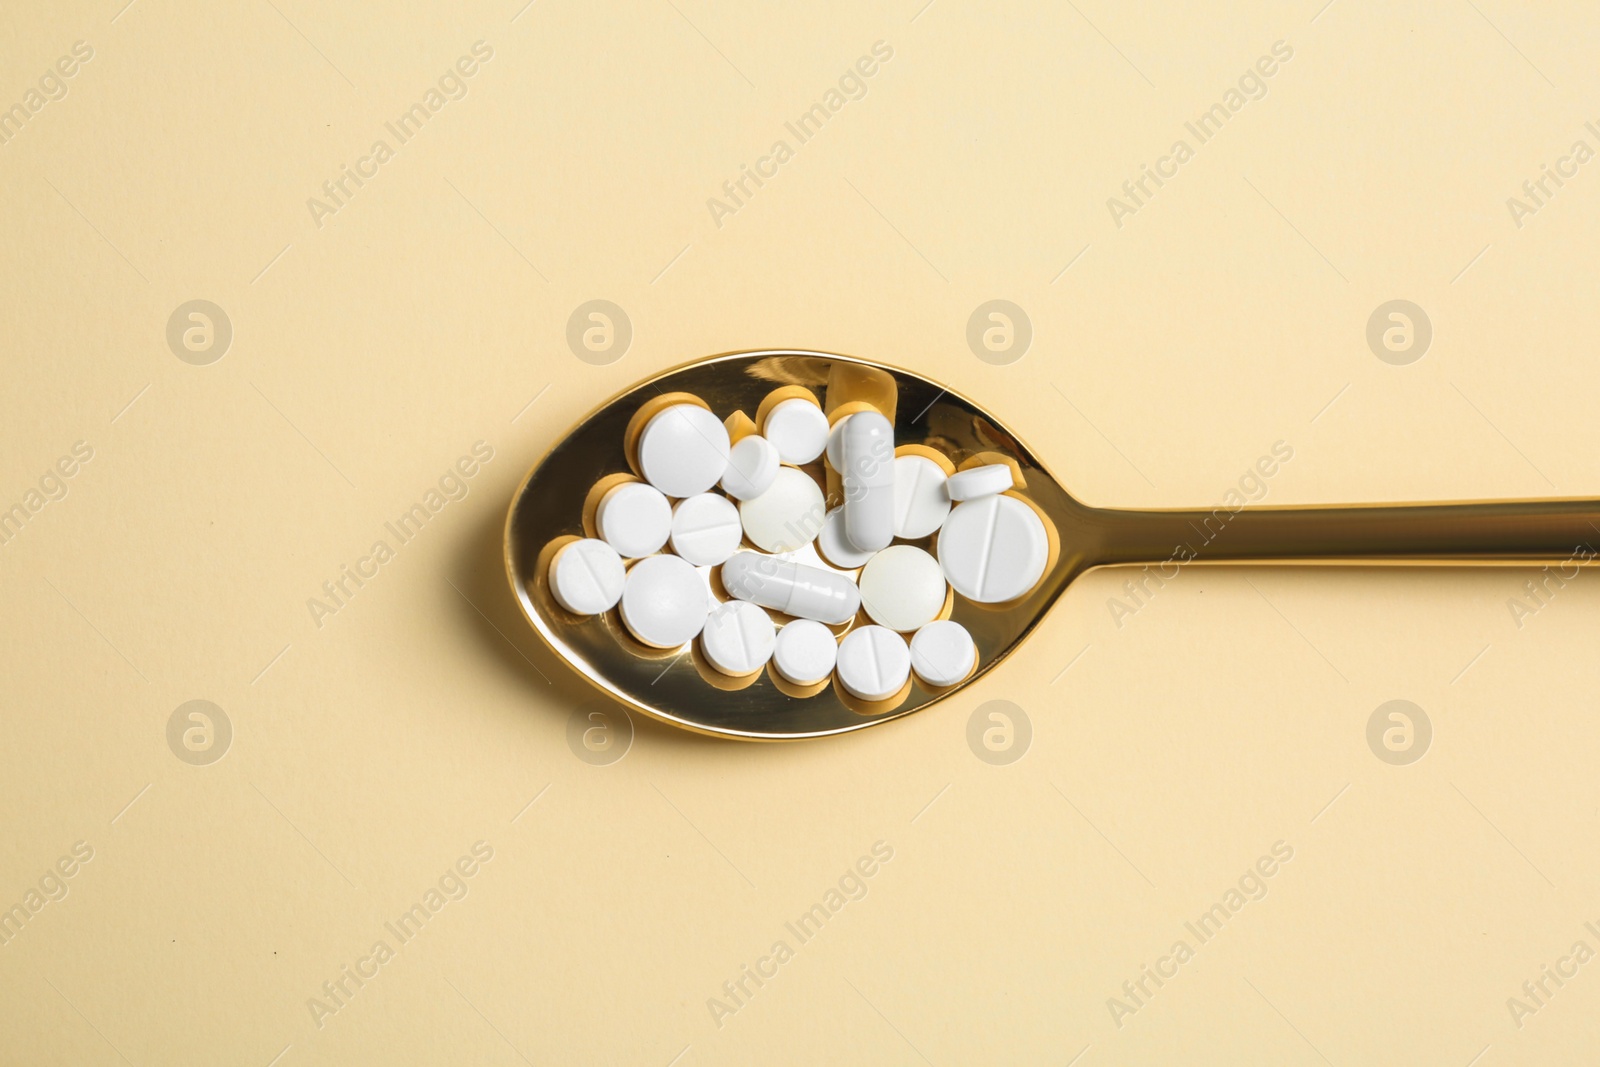 Photo of Spoon of pills on color background, top view